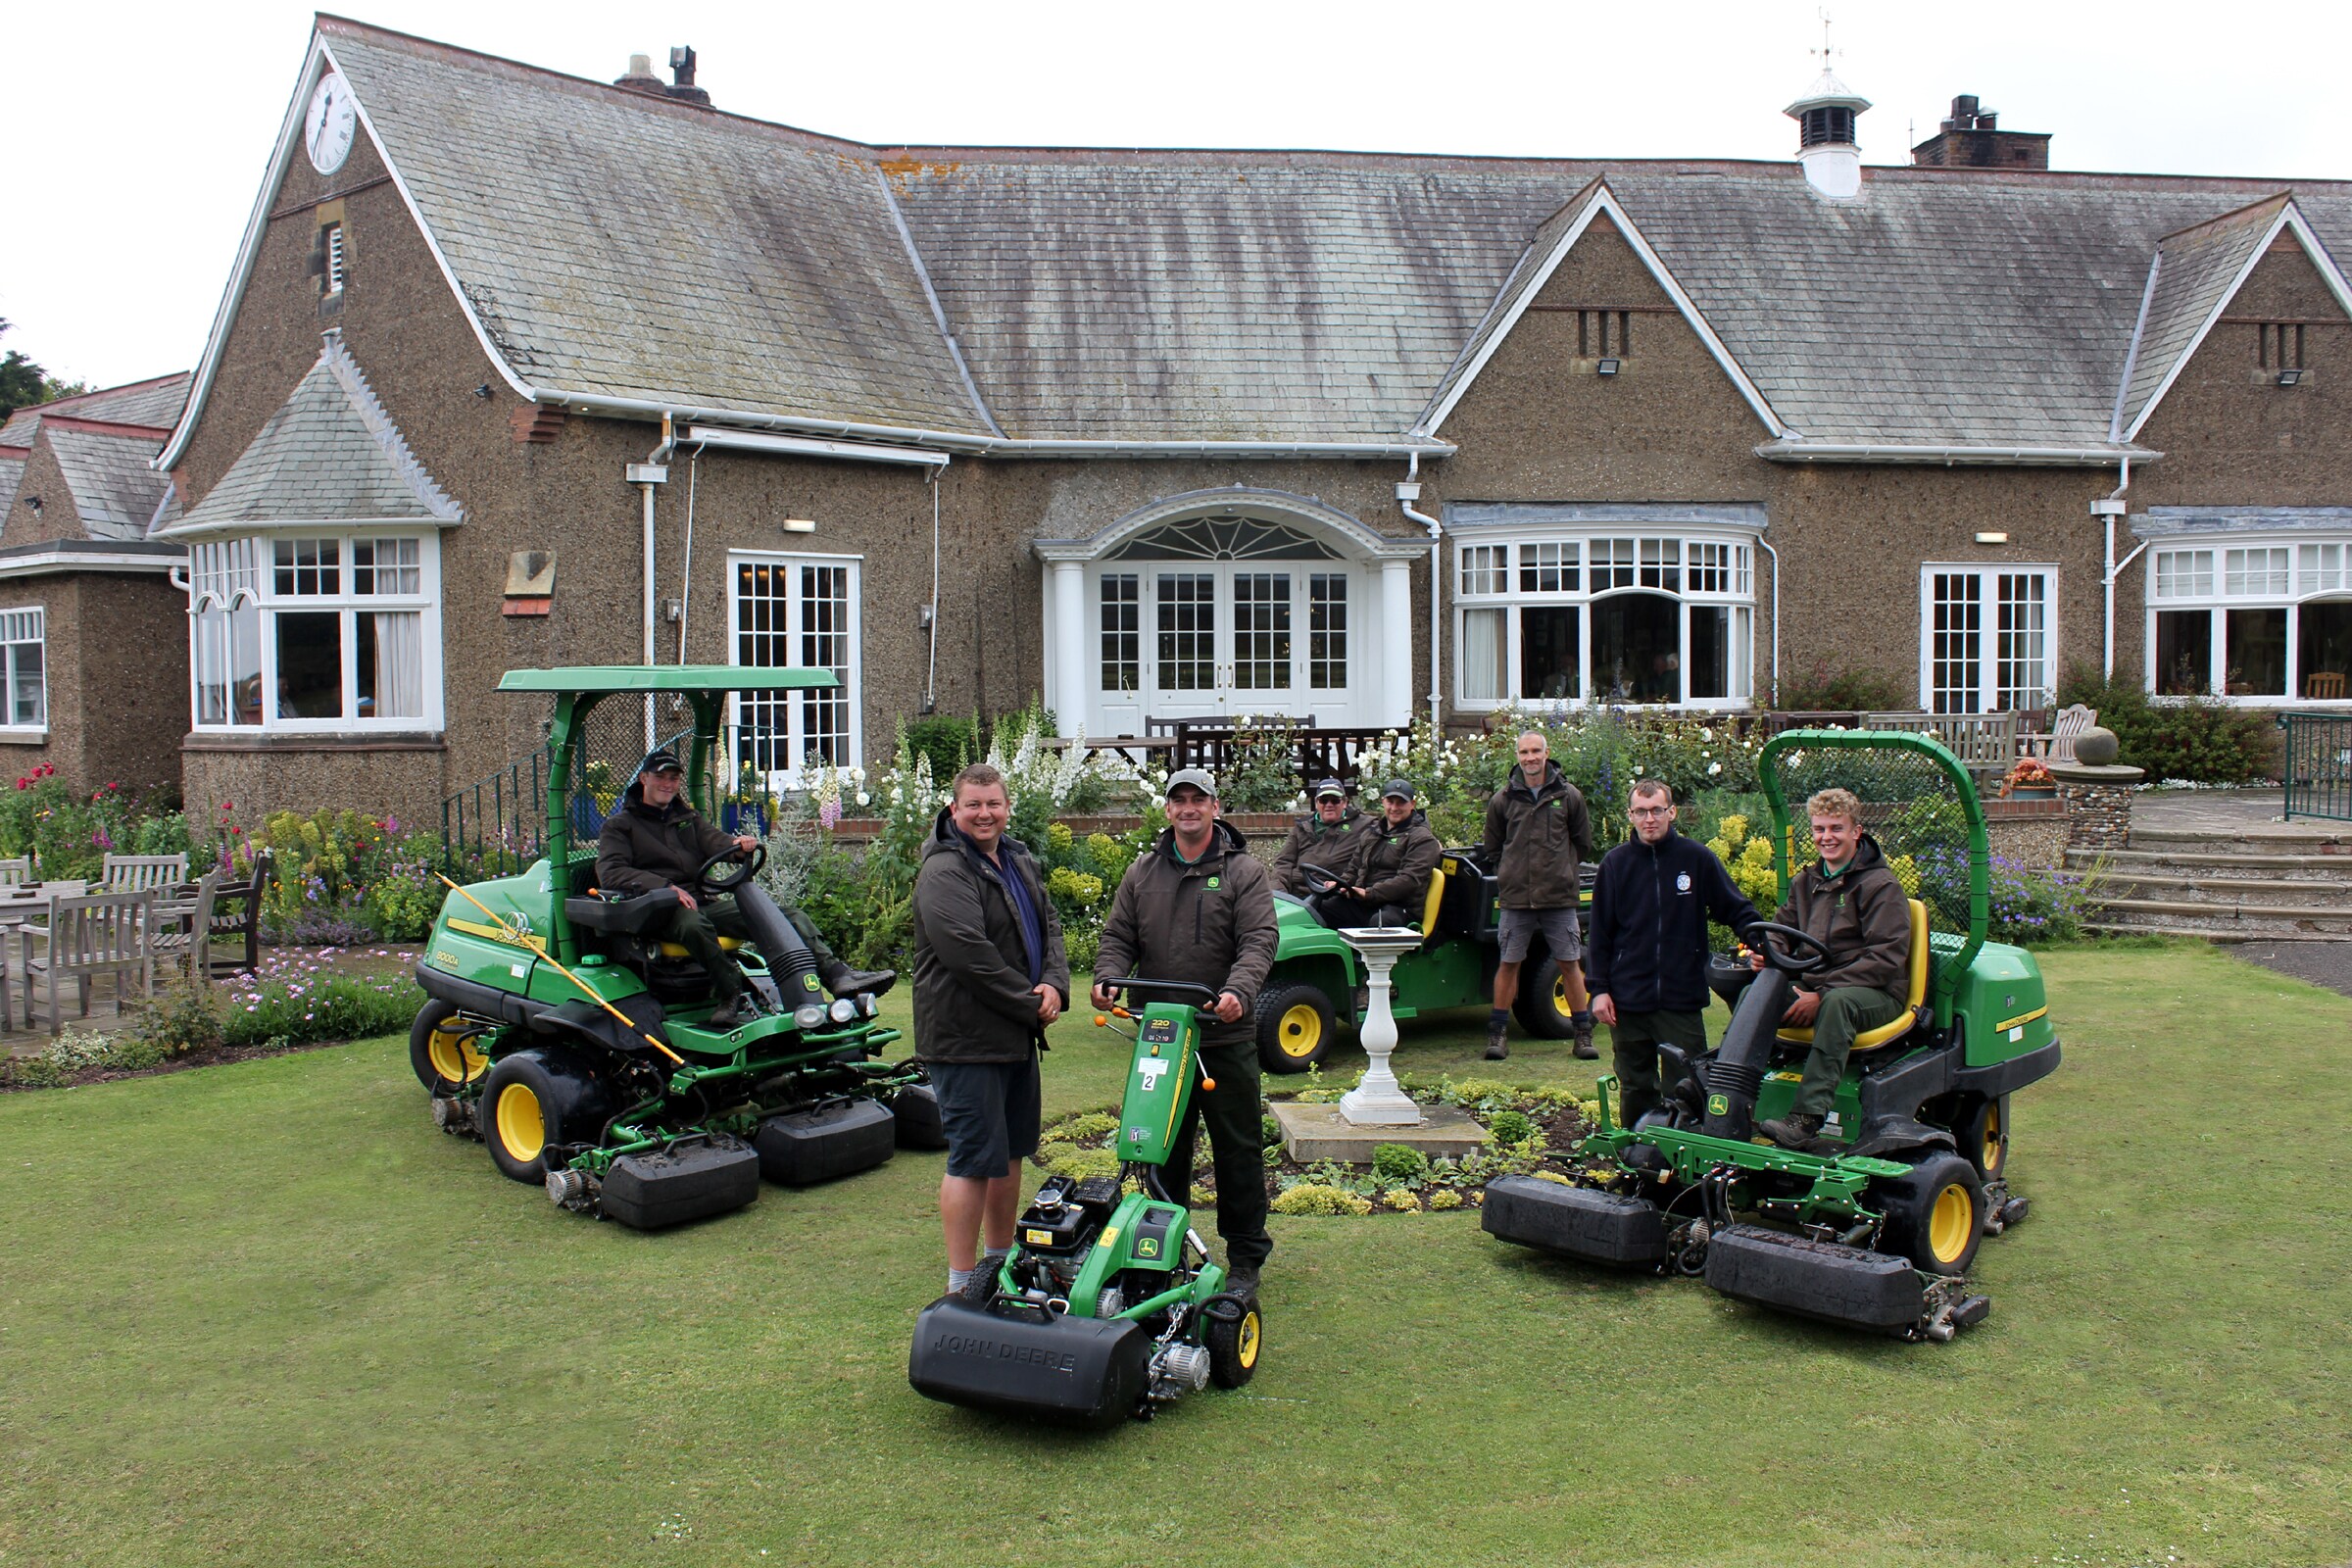 Ganton Golf Club’s head greenkeeper Andrew West (front right) and the greenkeeping team.